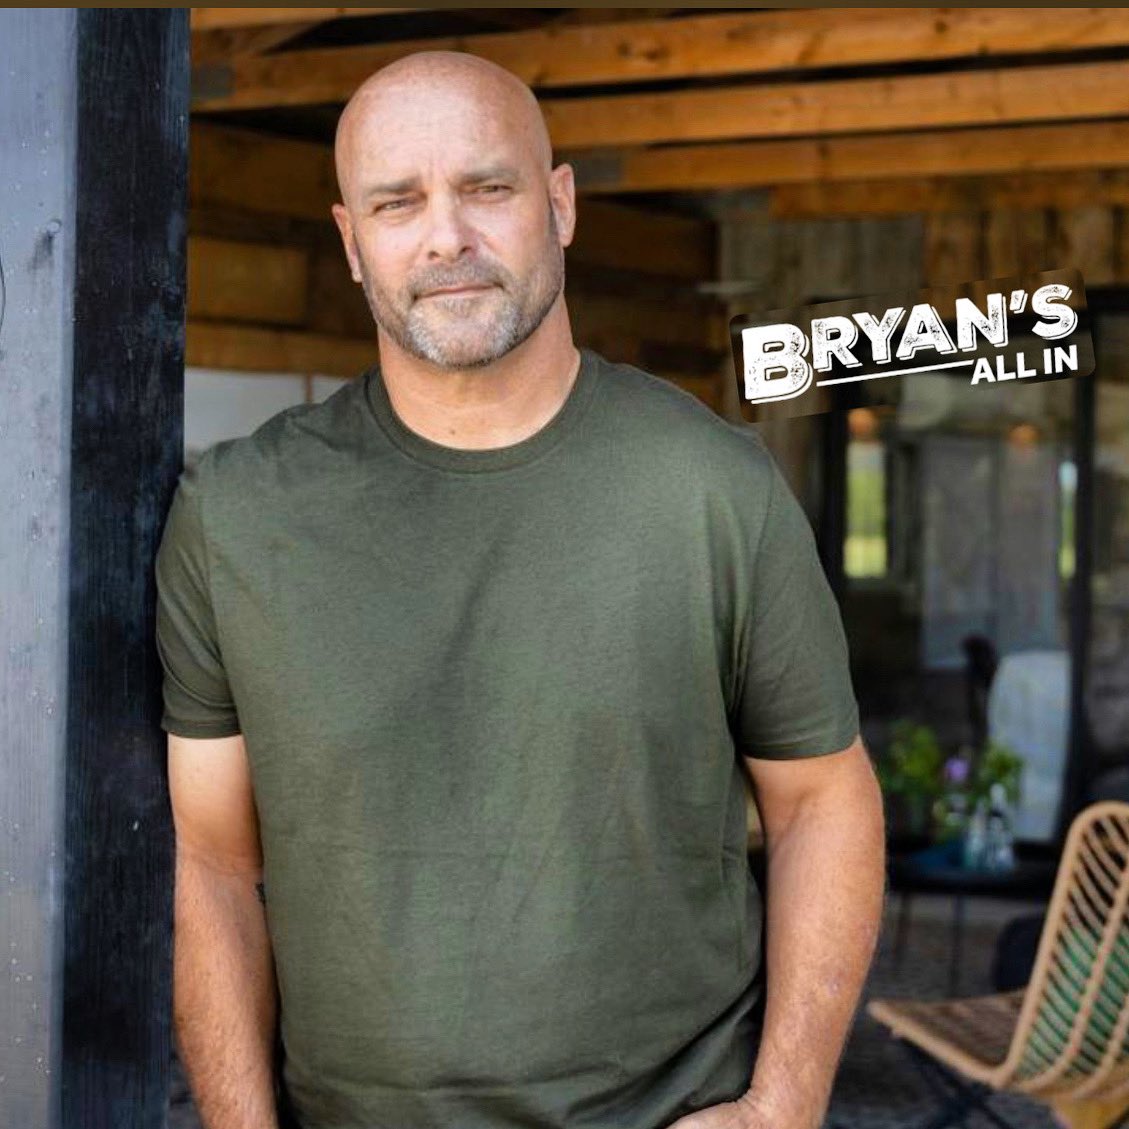 Tonight!! October 8 @ 9pm EST. Don’t miss the special 2 part sneak peek premiere of Bryan’s All In. Only on @hgtvcanada or stream on @stacktv #BryansAllIn #HGTV #ThisIsIt